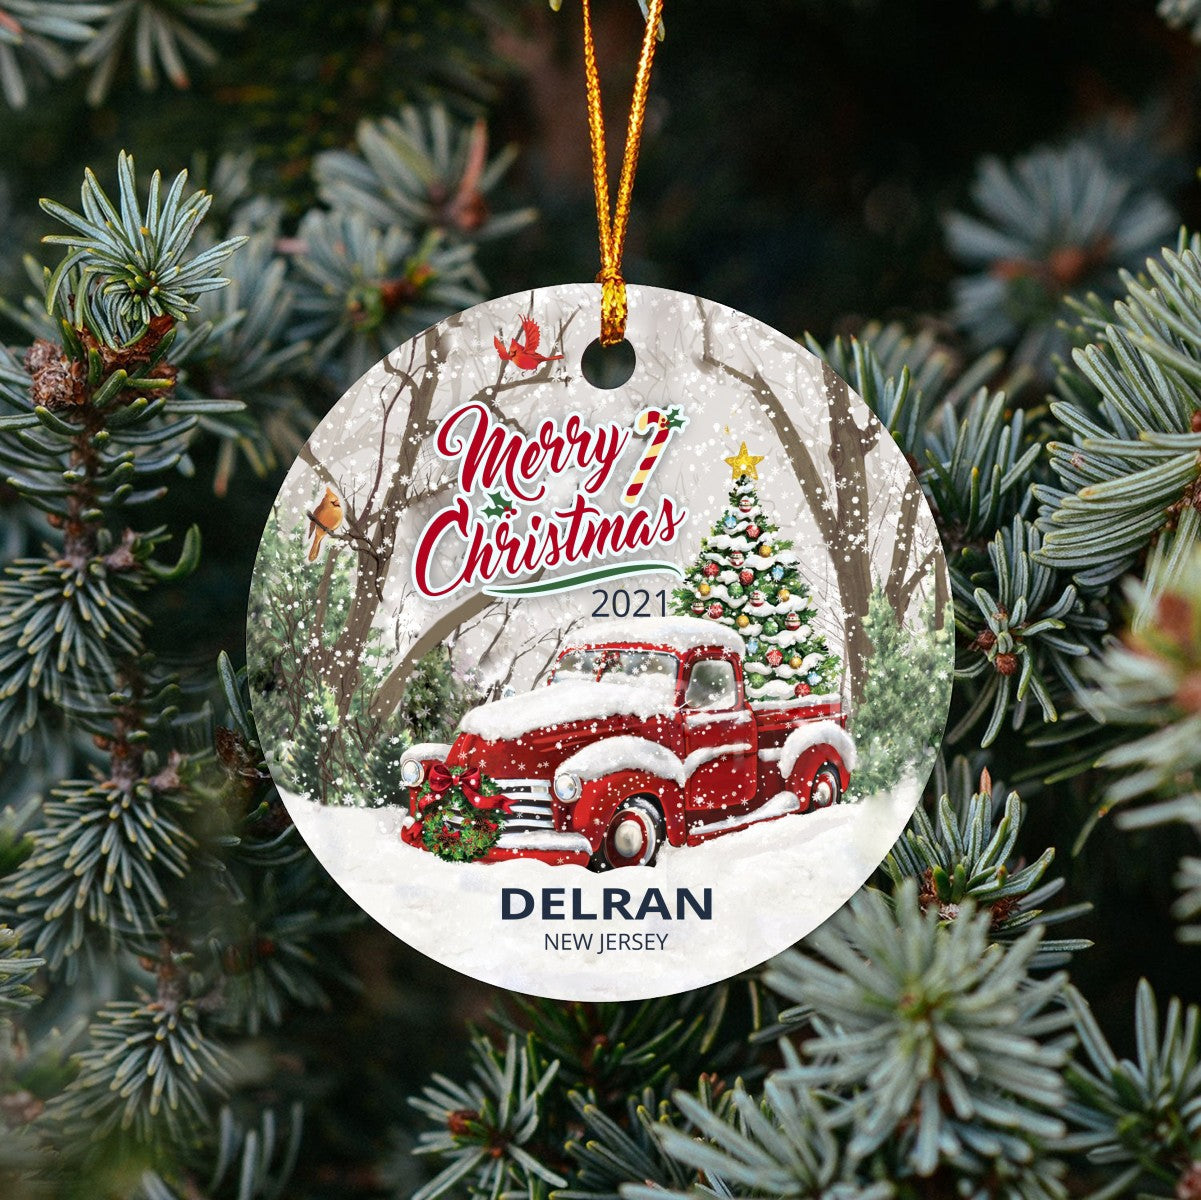 Christmas Tree Ornaments Delran - Ornament With Name City, State Delran New Jersey NJ Ornament - Red Truck Xmas Ornaments 3'' Plastic Gift For Family, Friend And Housewarming